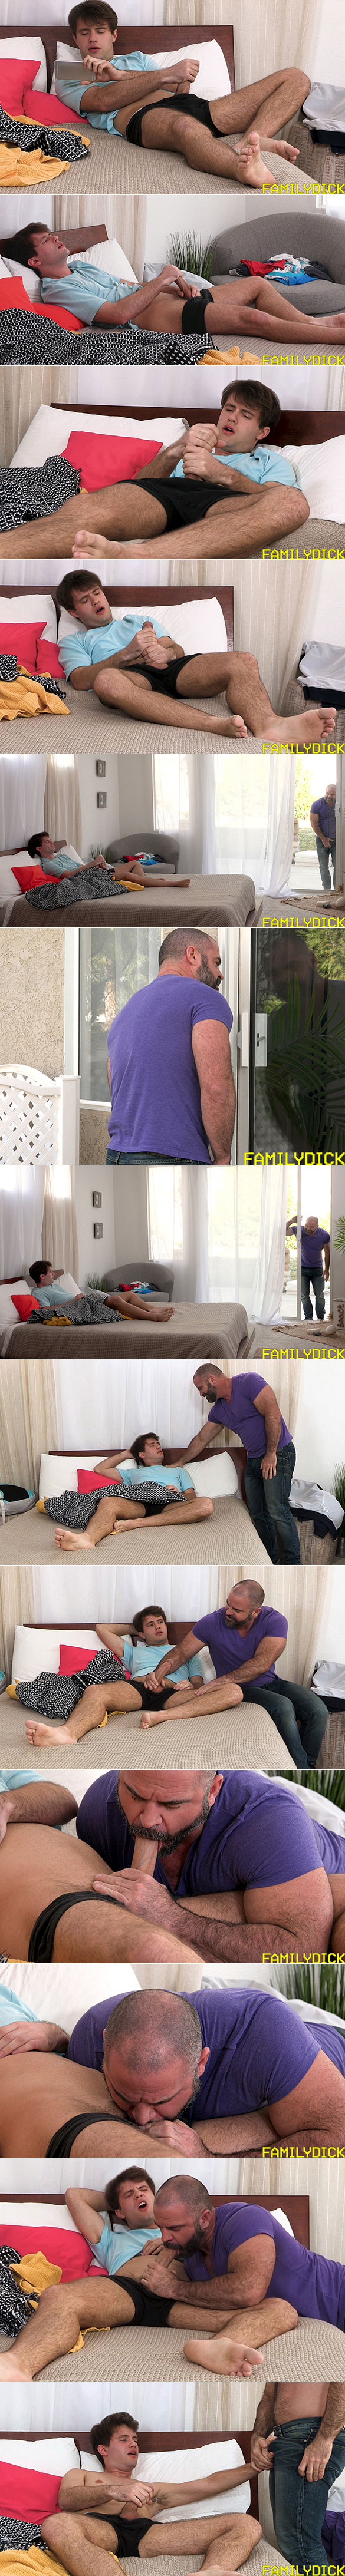 FamilyDick: "Love at Home – Chapter 1: A Gentle Instructor"